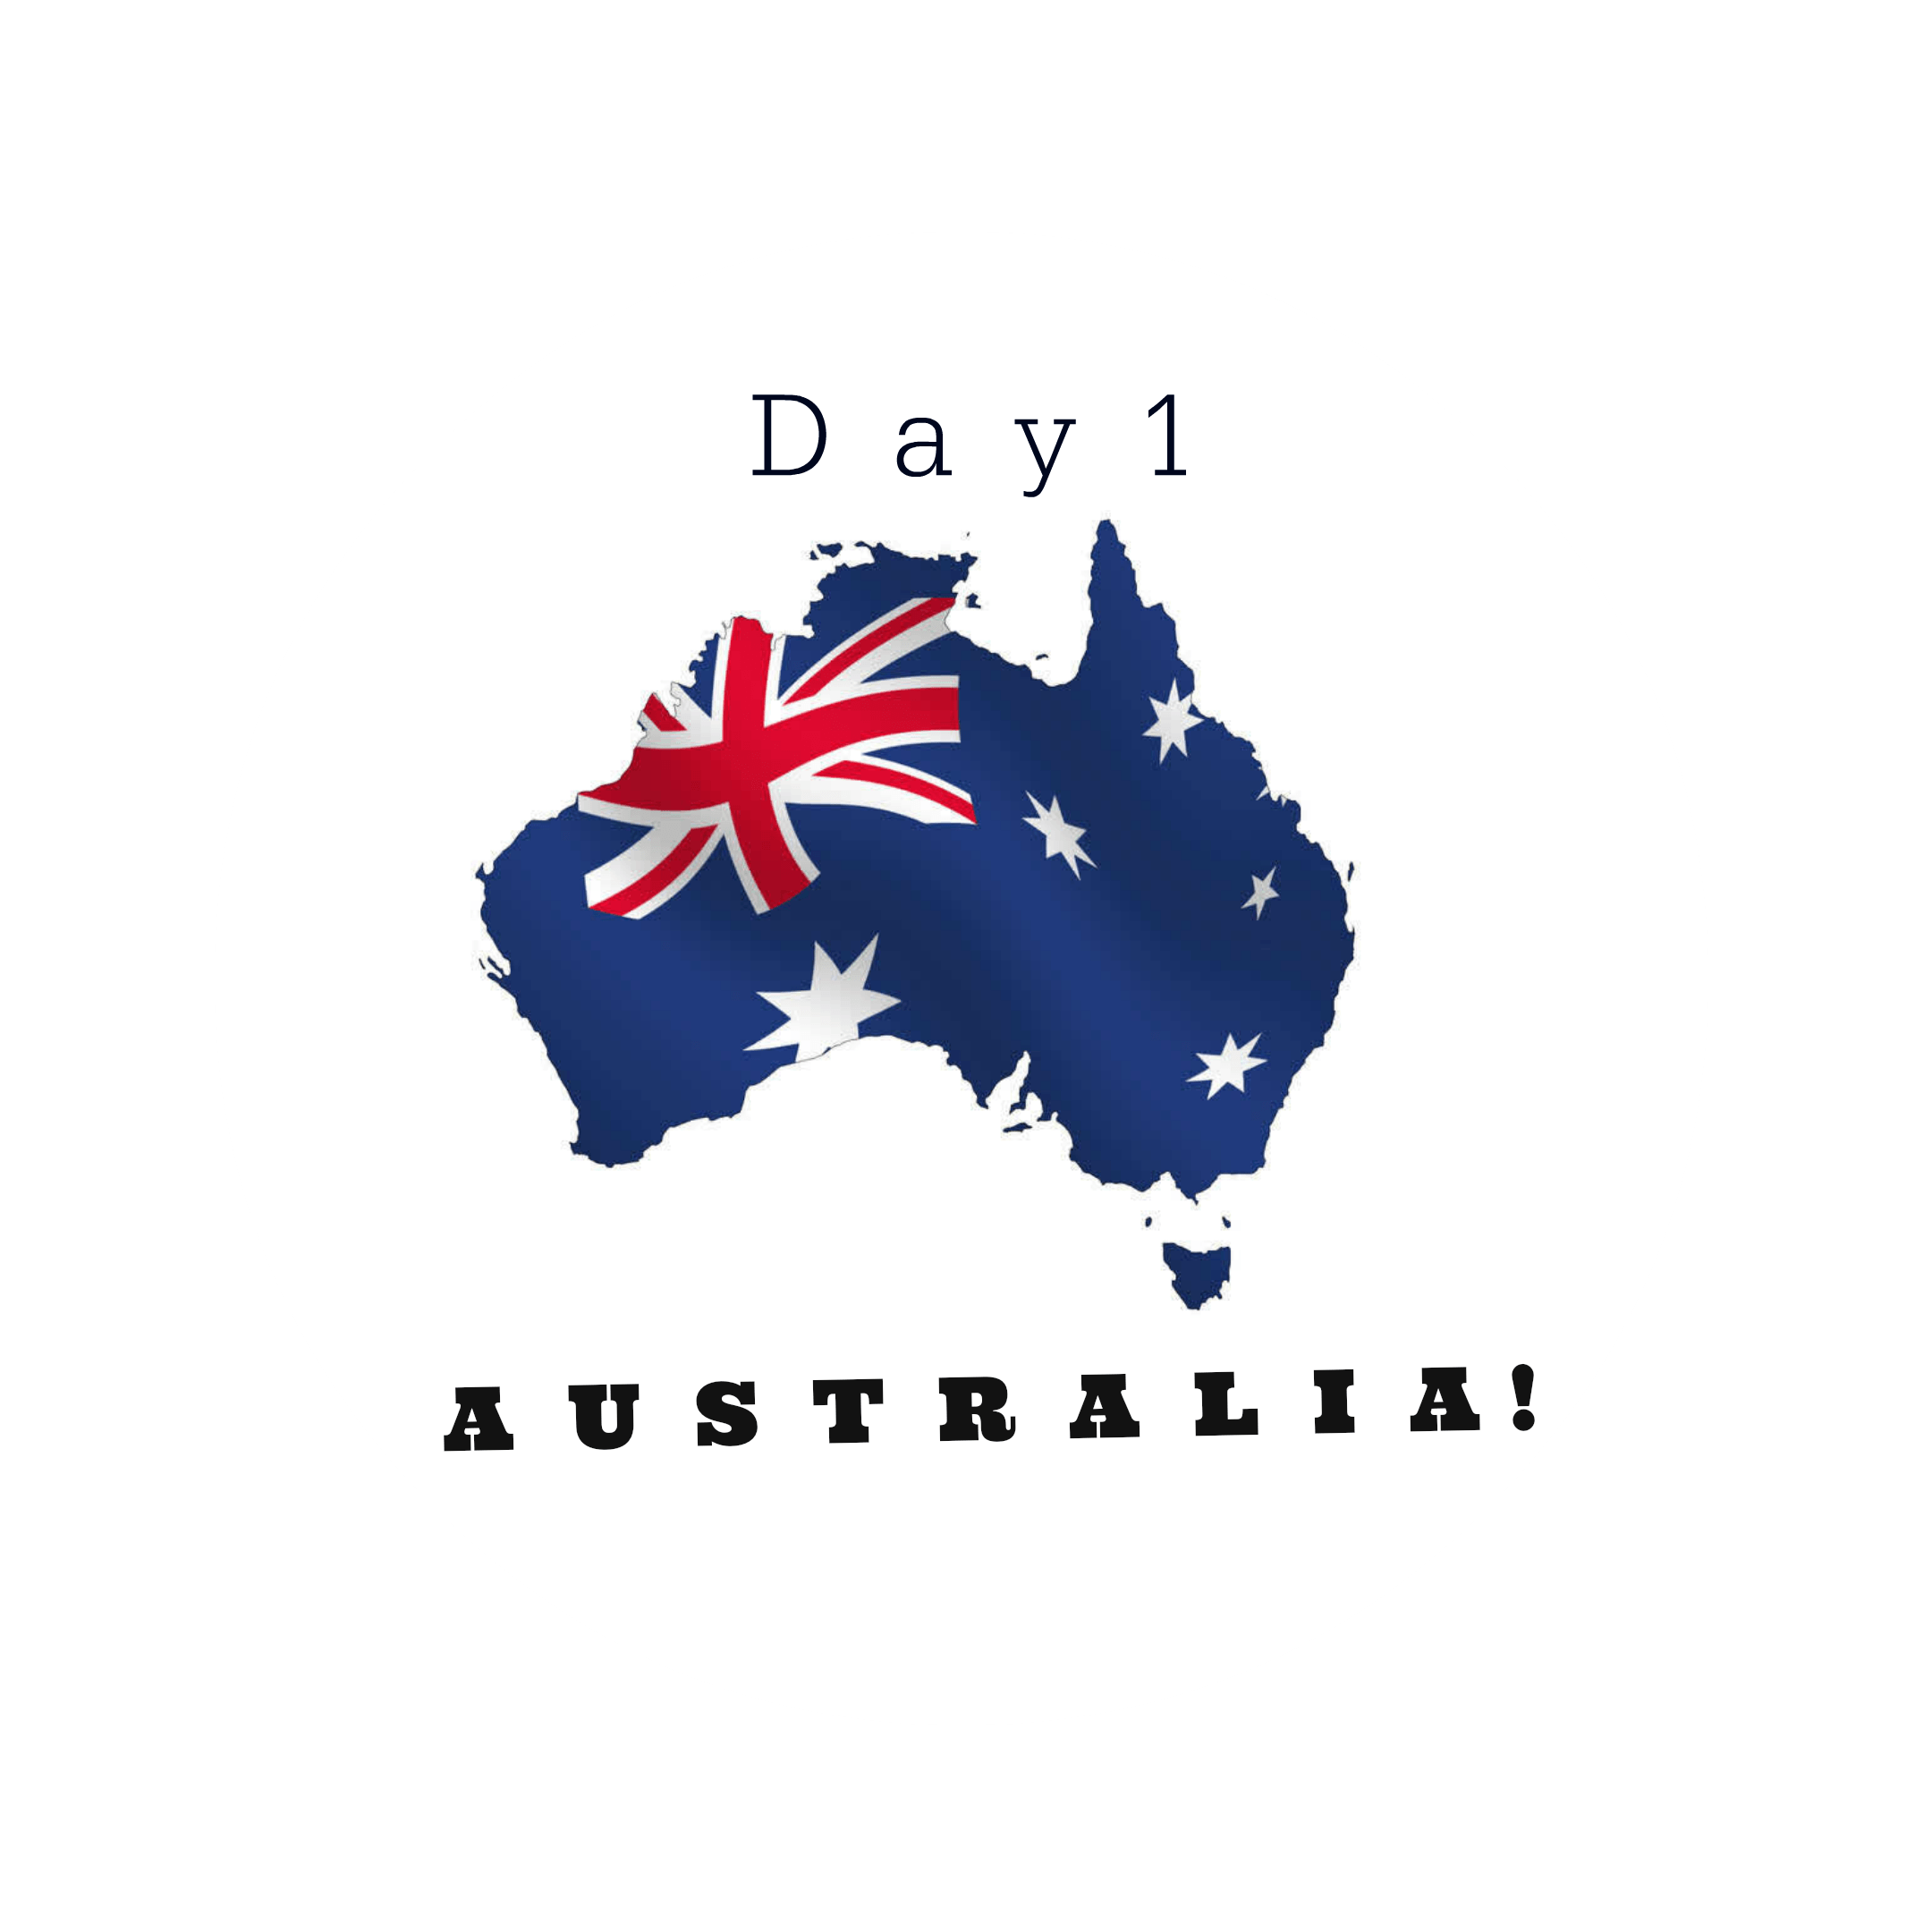 Funny Australian Logo - The first day of the challenge takes us to Australia with Rolf ...